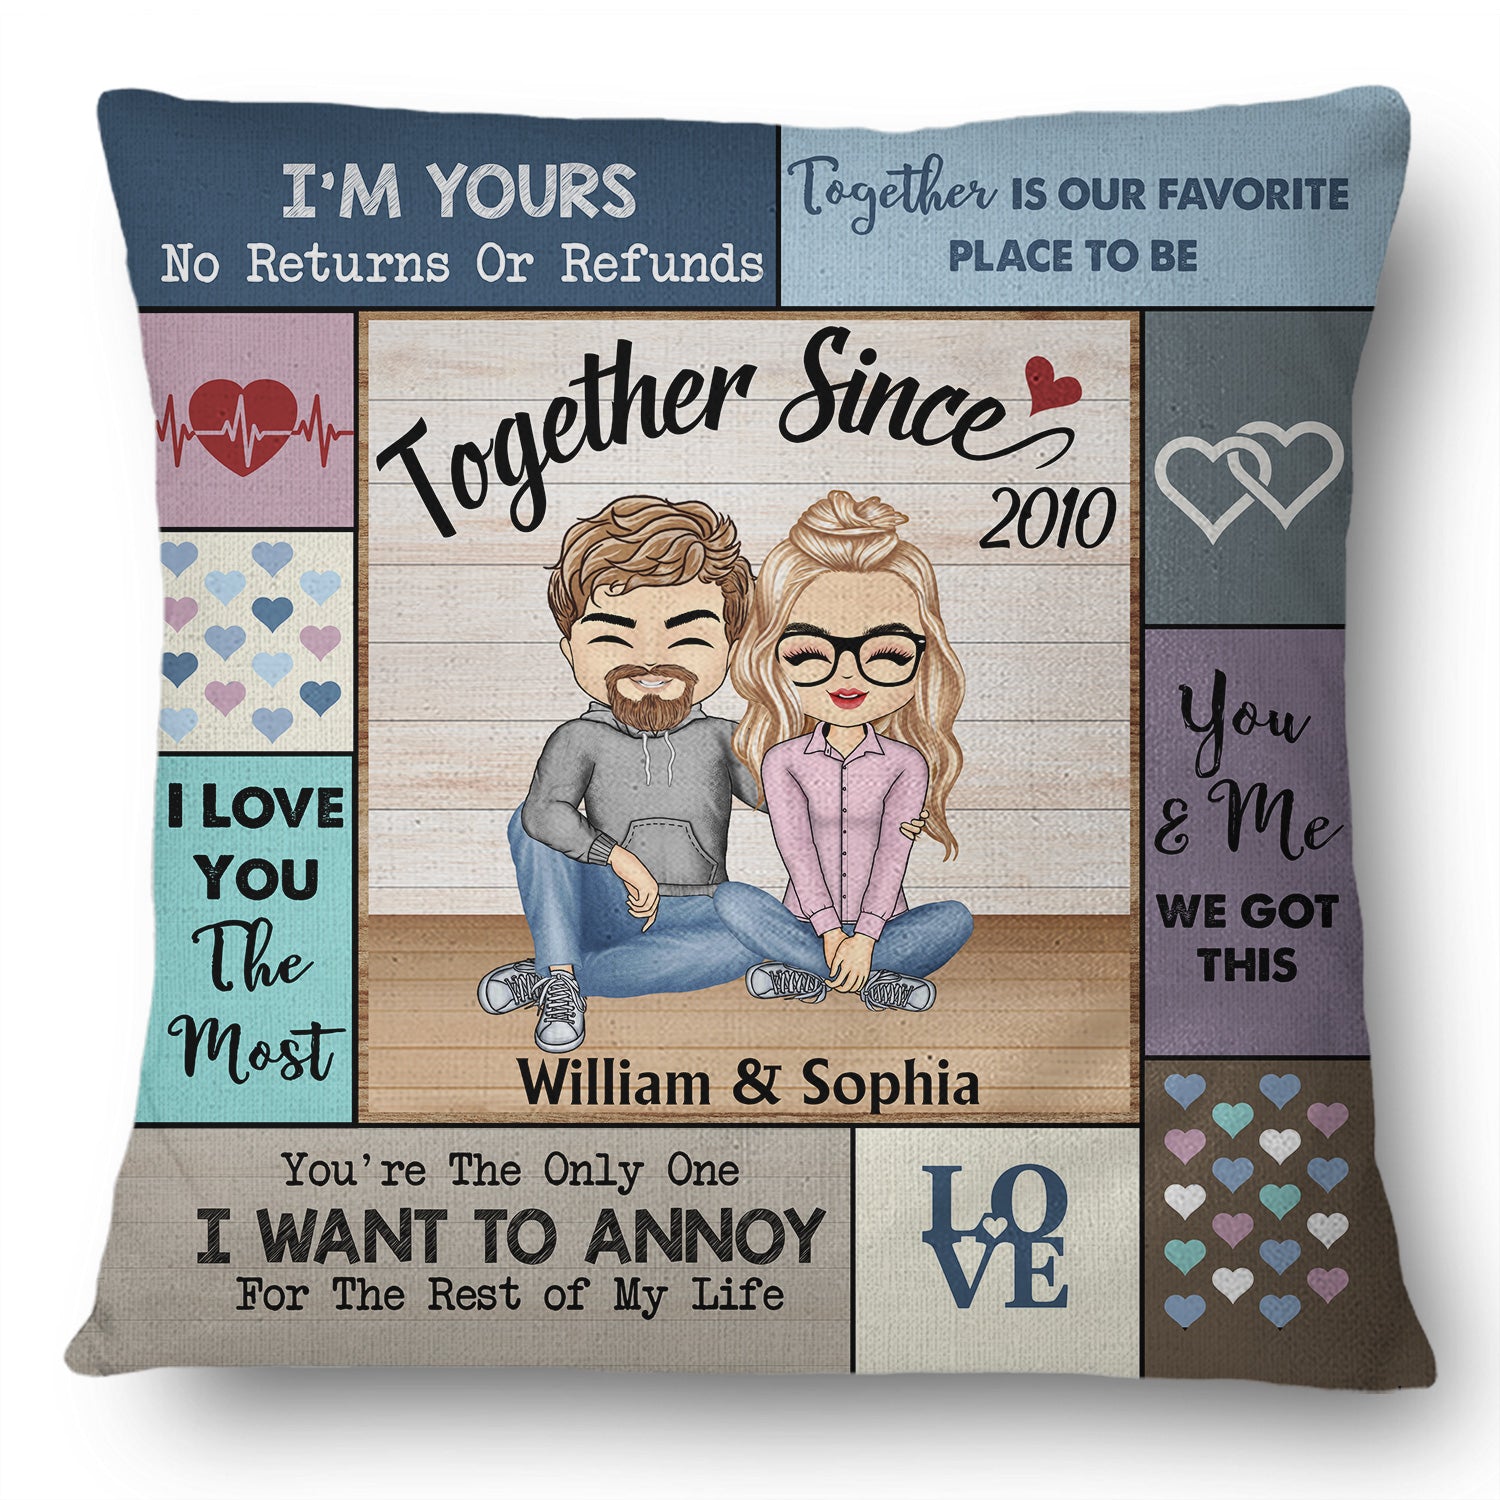 I Love You The Most Together Since Couple - Anniversary, Birthday Gift For Spouse, Husband, Wife, Boyfriend, Girlfriend - Personalized Custom Pillow